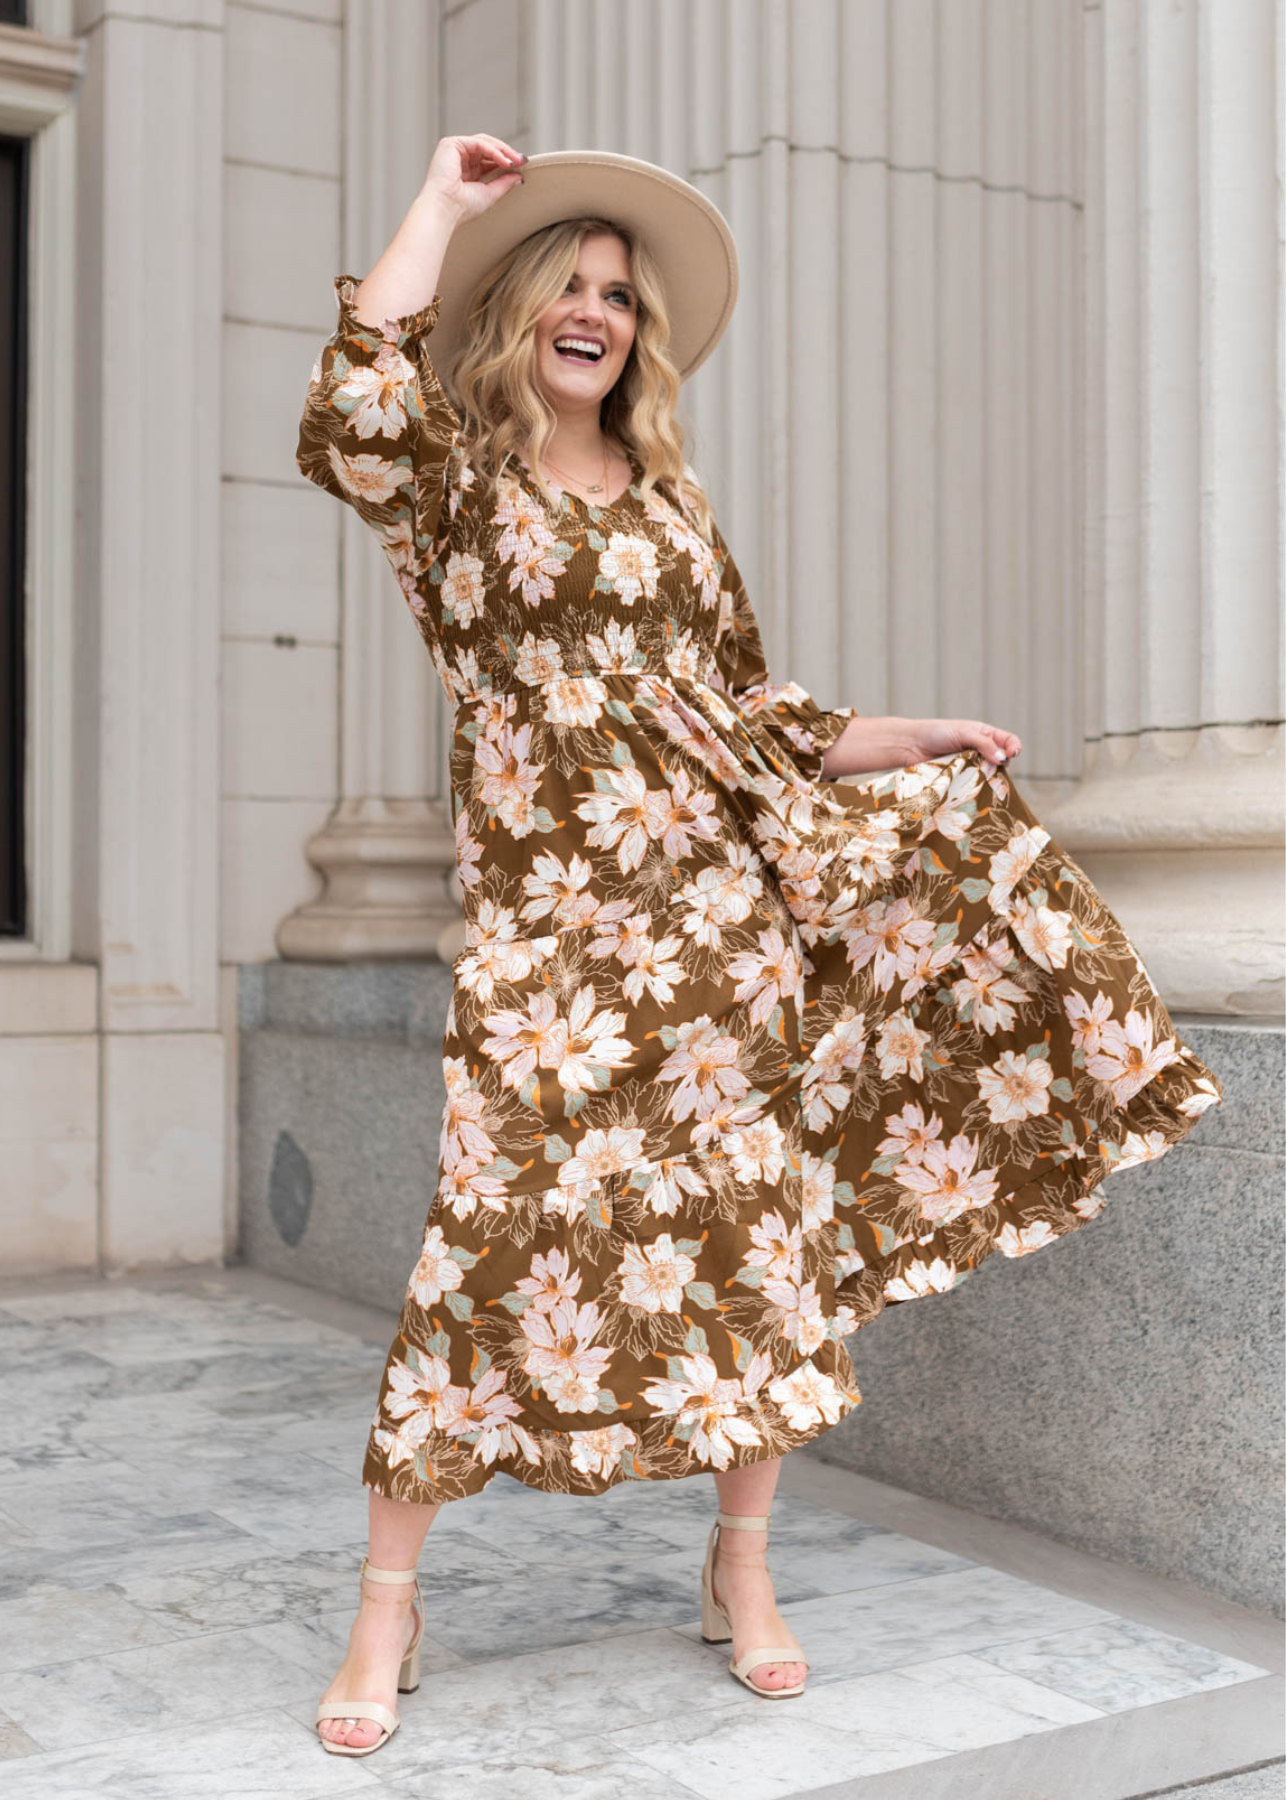 Brown floral dress with tiered skirt